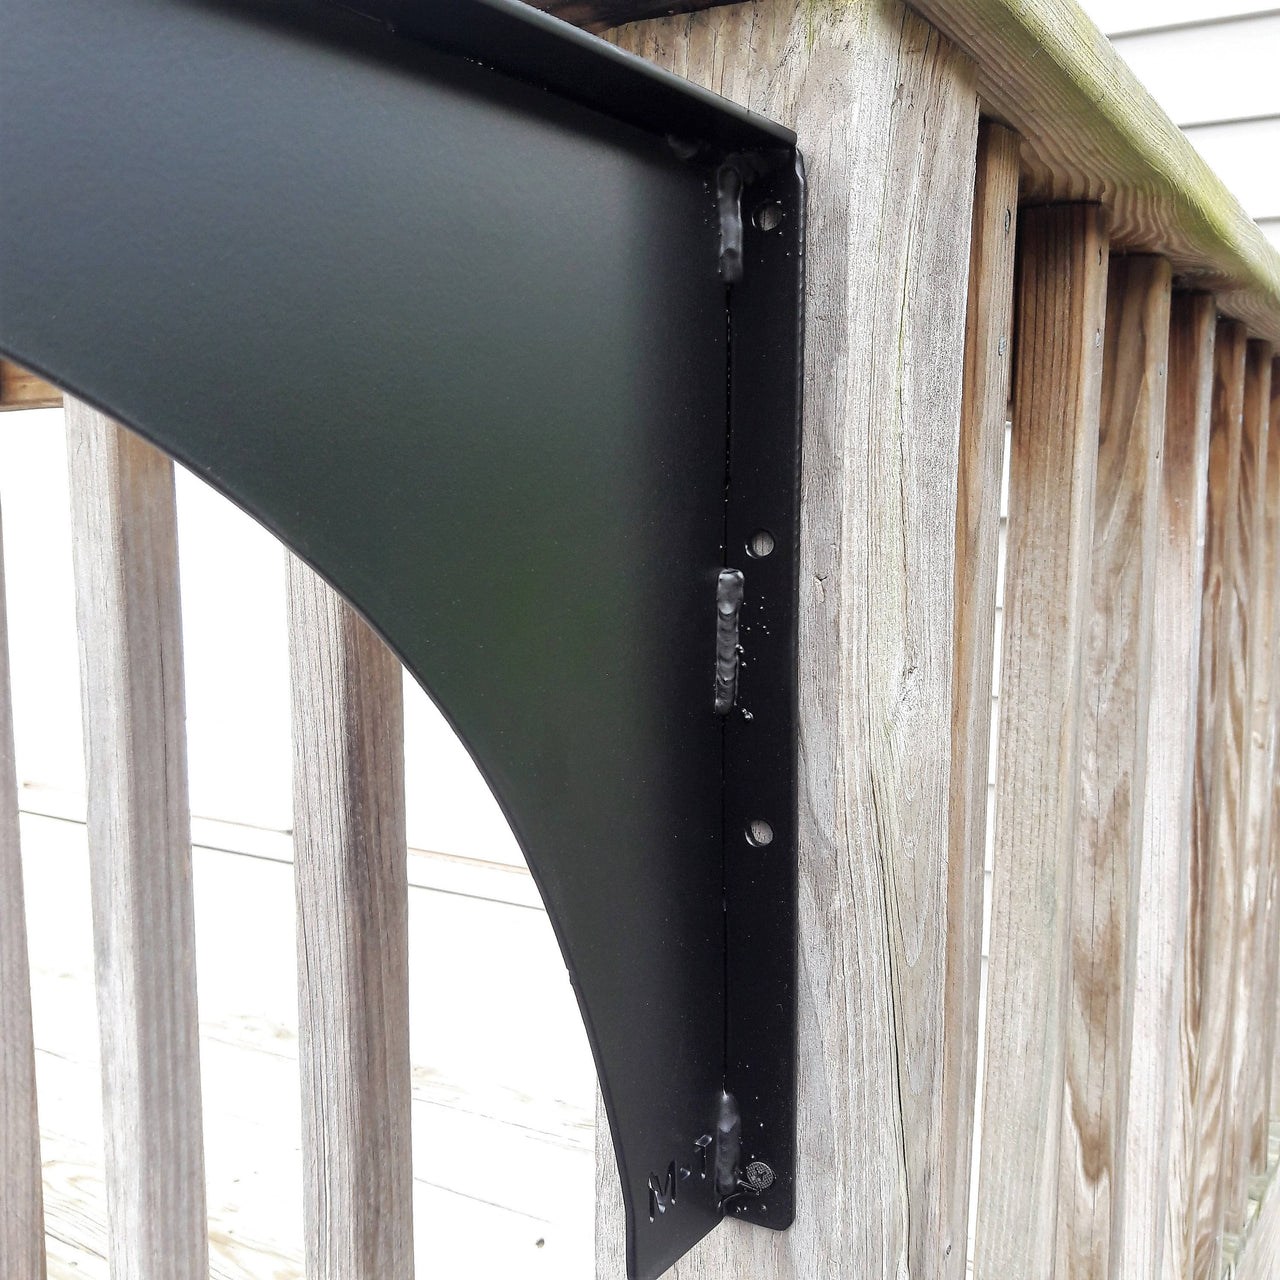 This picture highlights a hanging post and shows the mounting holes